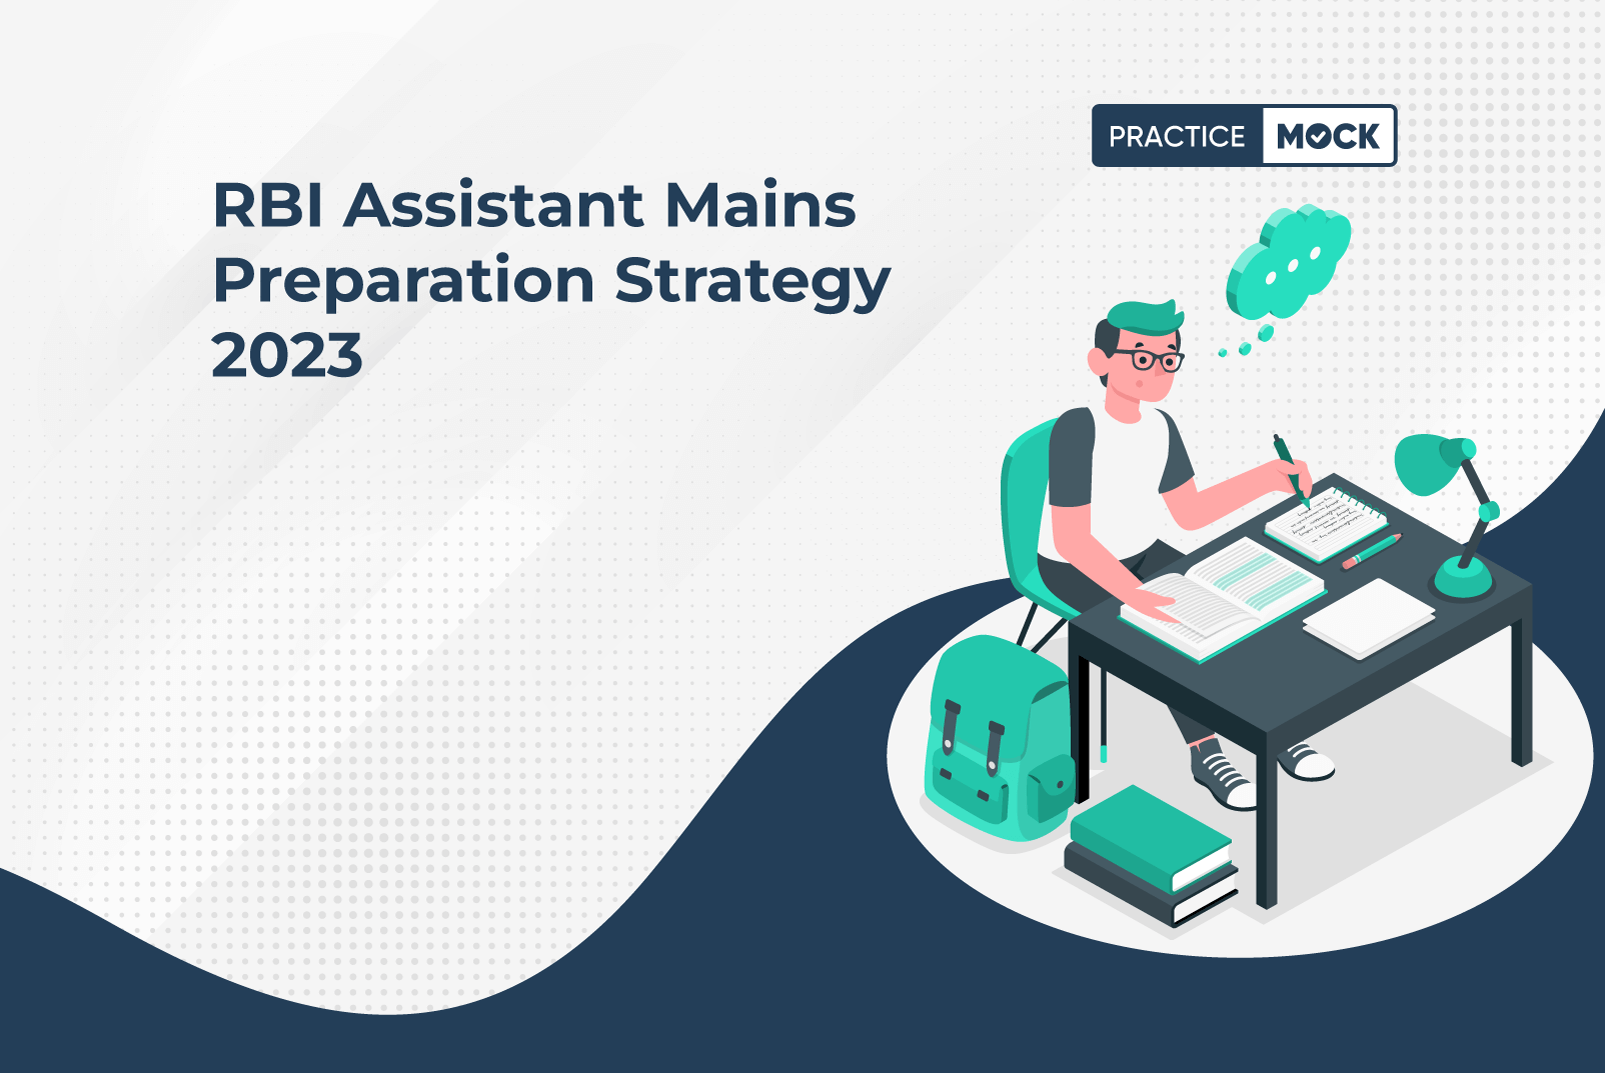 RBI Assistant Mains Preparation Strategy 2023 (1)